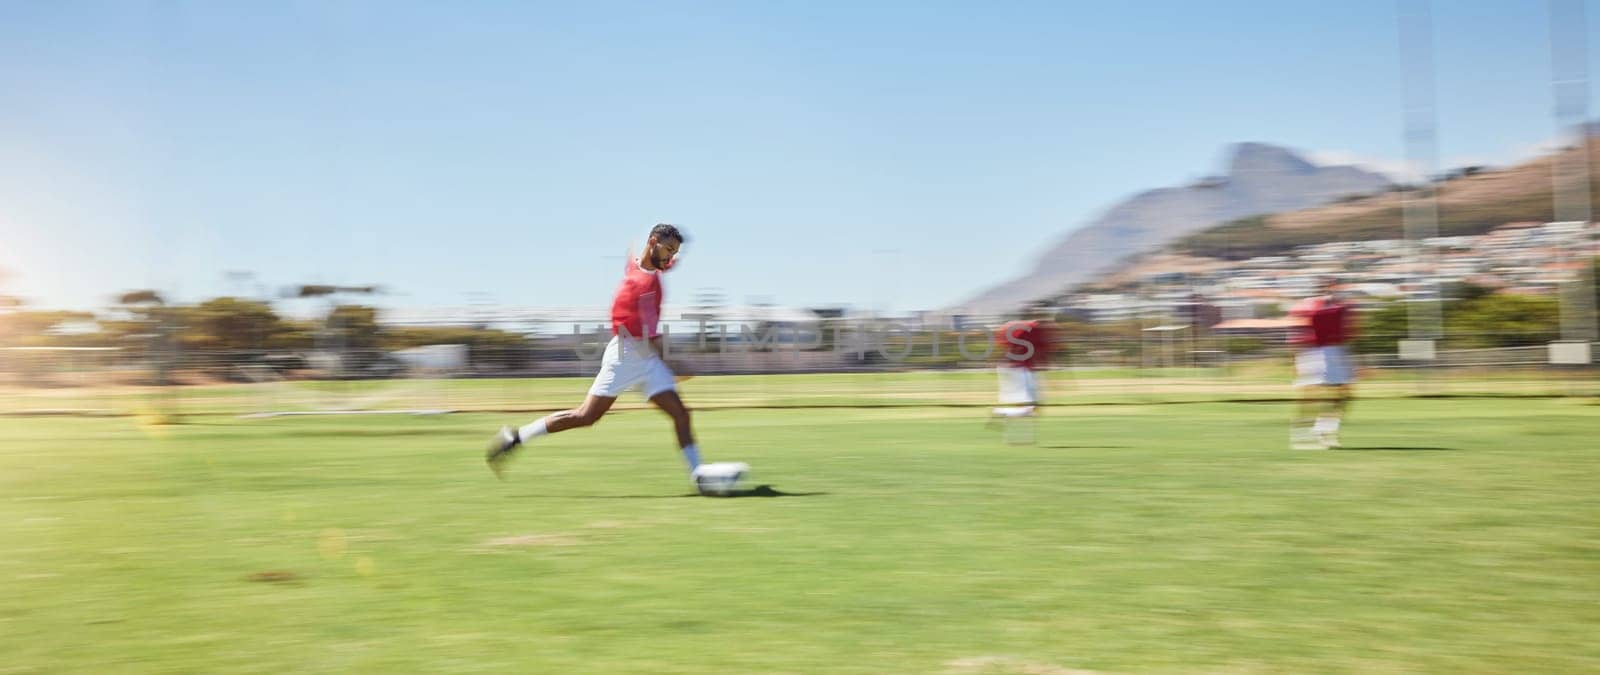 Running, football and sports with man on field training with team for fitness, games and workout. Freedom, health and goals with soccer player for exercise, energy and action on football field.